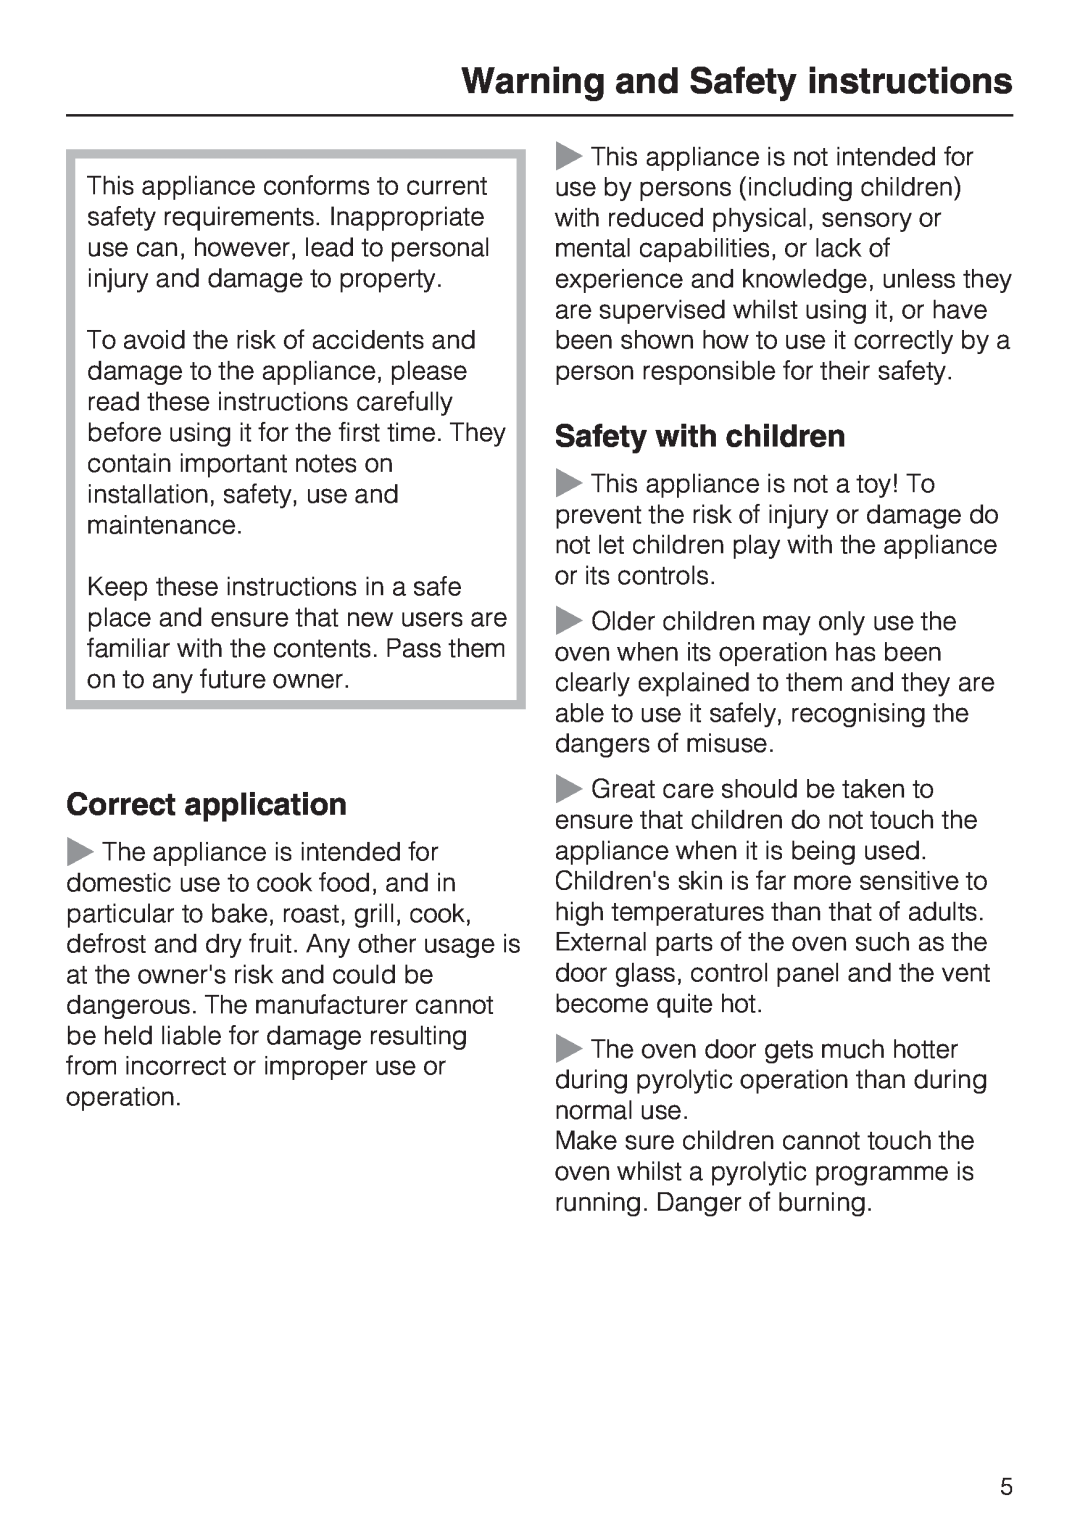 Miele H 5460-BP installation instructions Warning and Safety instructions, Correct application, Safety with children 